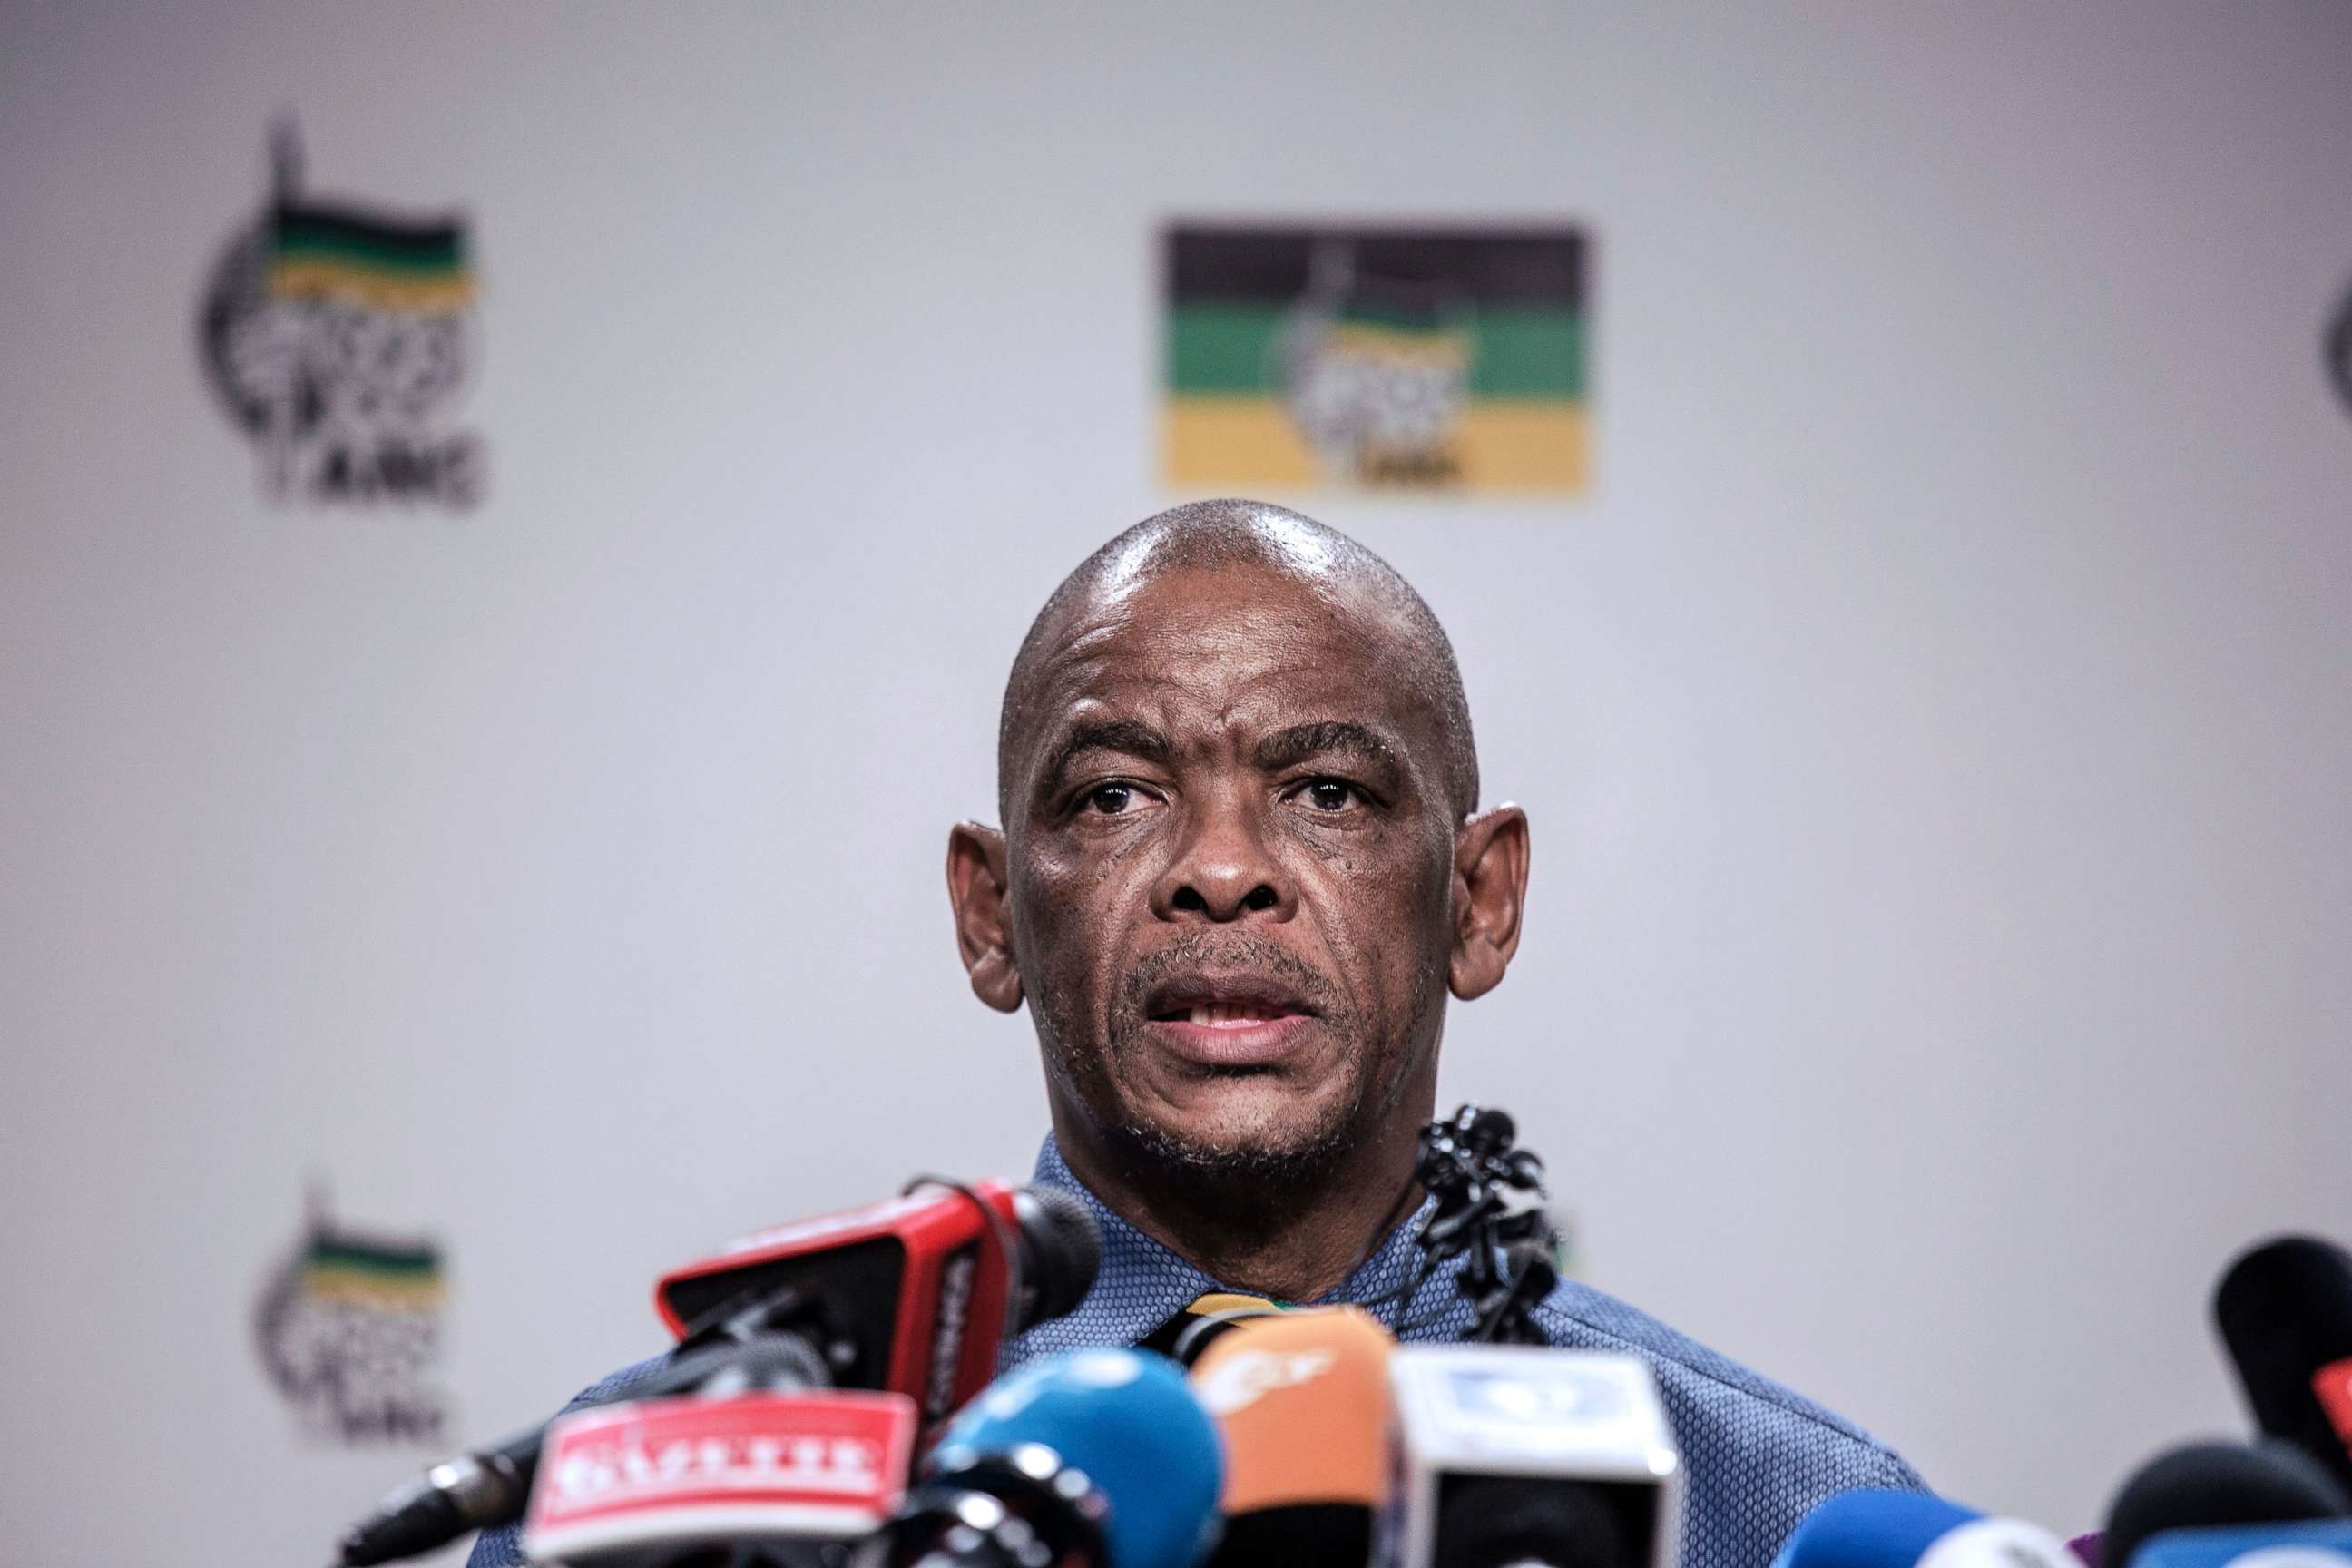 PHOTO: South African ruling Party African National Congress Secretary General Ace Magashule gives a press briefing on Feb. 13, 2018 on the outcome of the ANC National Executive Committee, in Johannesburg at the African National Congress Headquarters.